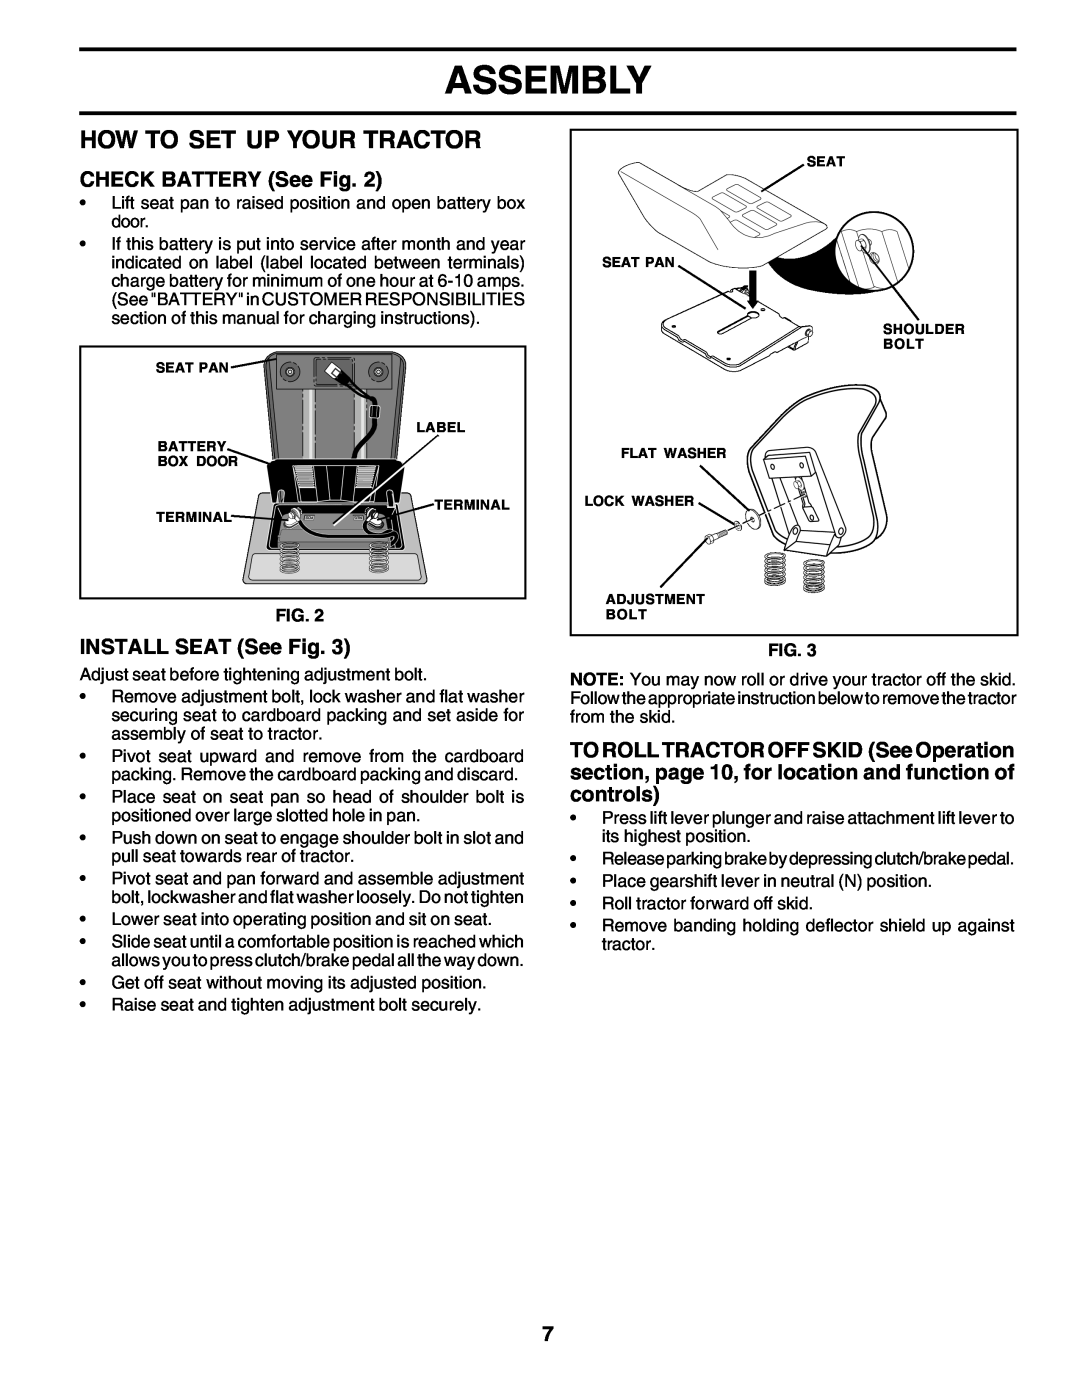 Poulan 179416 manual How To Set Up Your Tractor, Assembly, CHECK BATTERY See Fig, INSTALL SEAT See Fig 